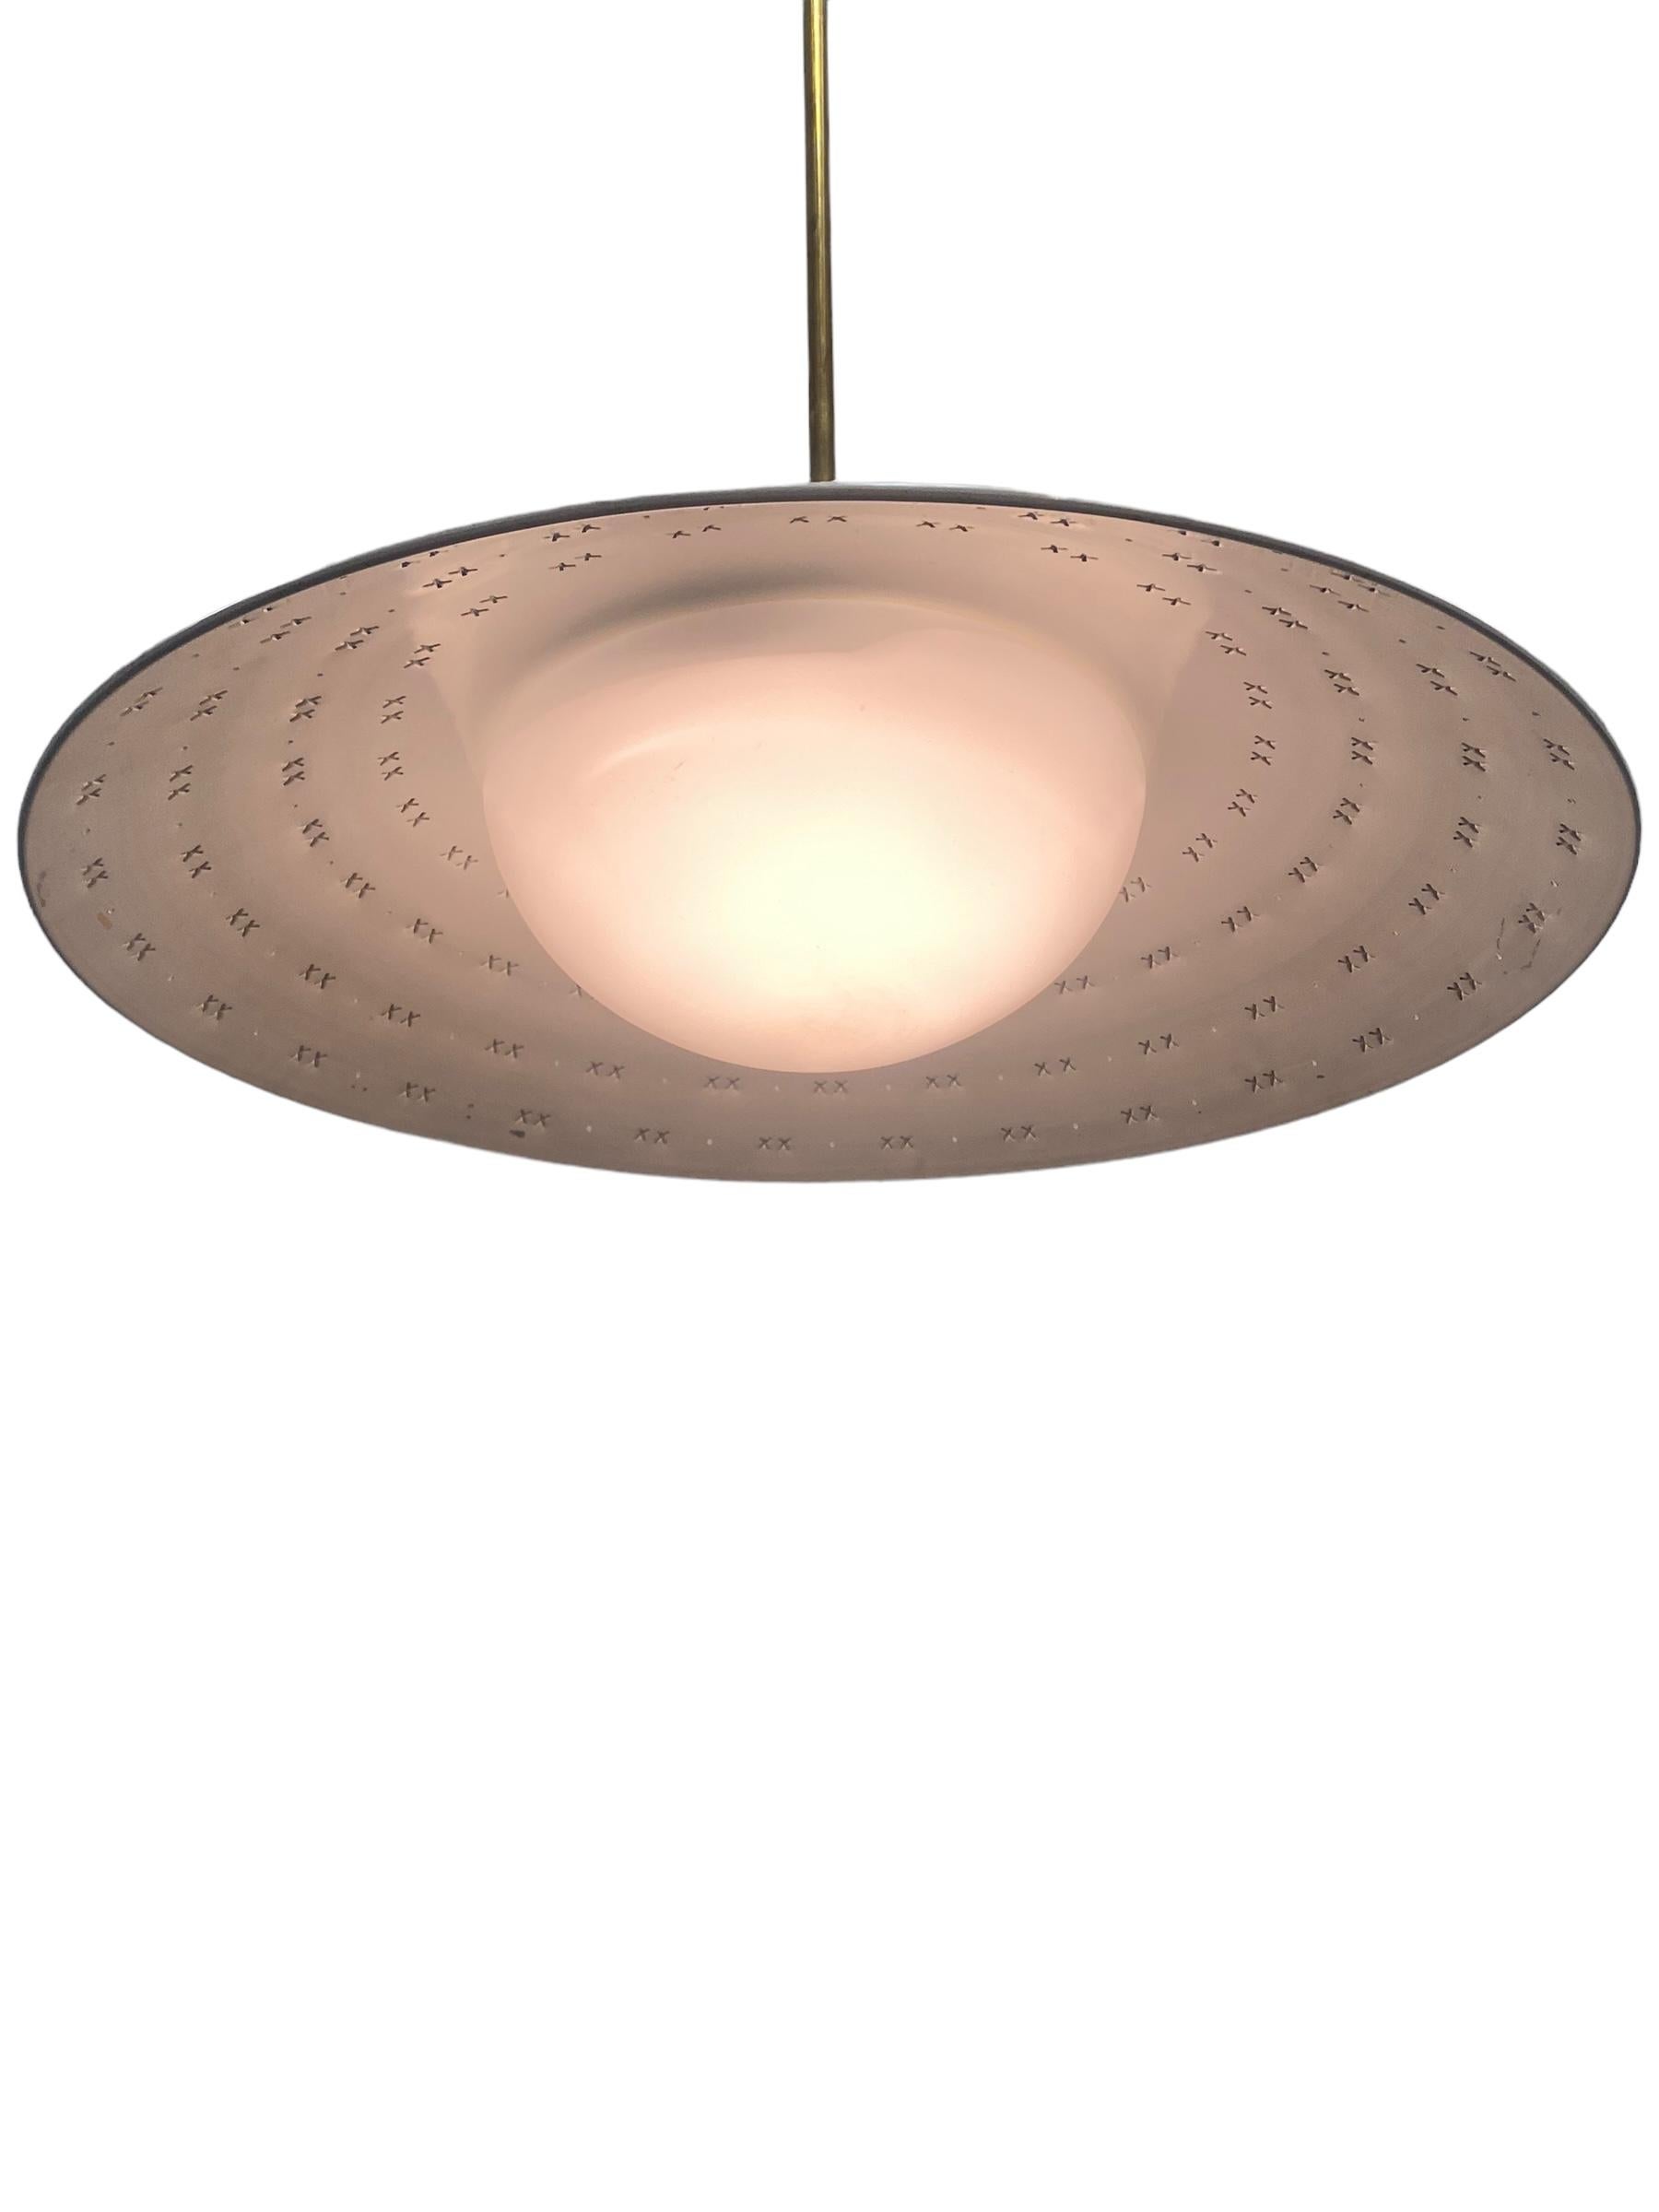 A Rare Lisa-Johansson Pape Ceiling Lamp FN 03-433, Orno 1950s In Good Condition For Sale In Helsinki, FI